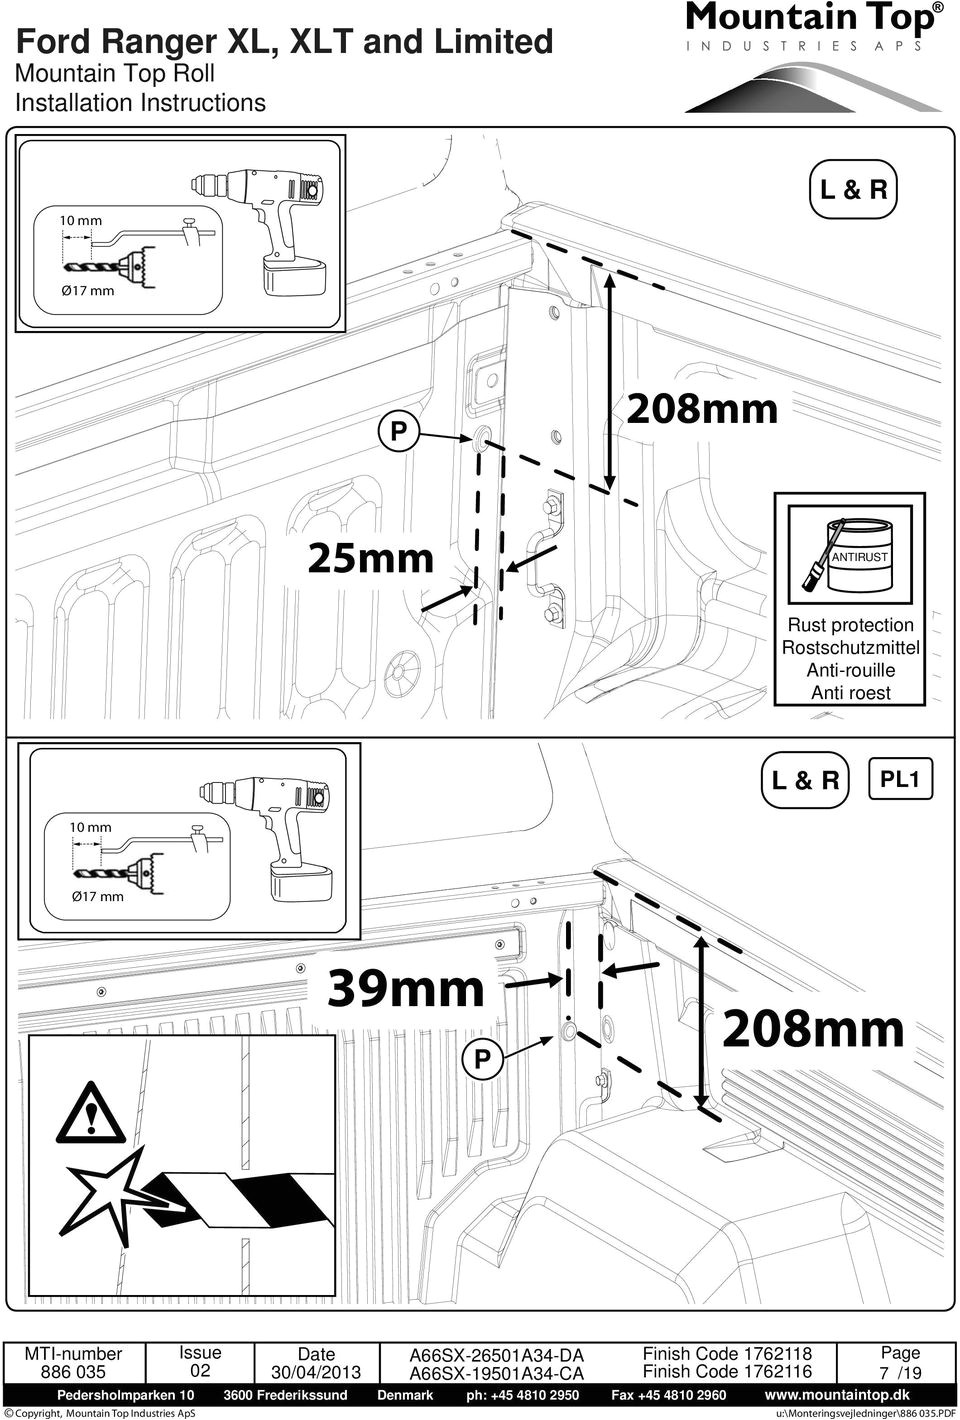 ford ranger xl xlt and limited mountain top roll installation instructions pdf